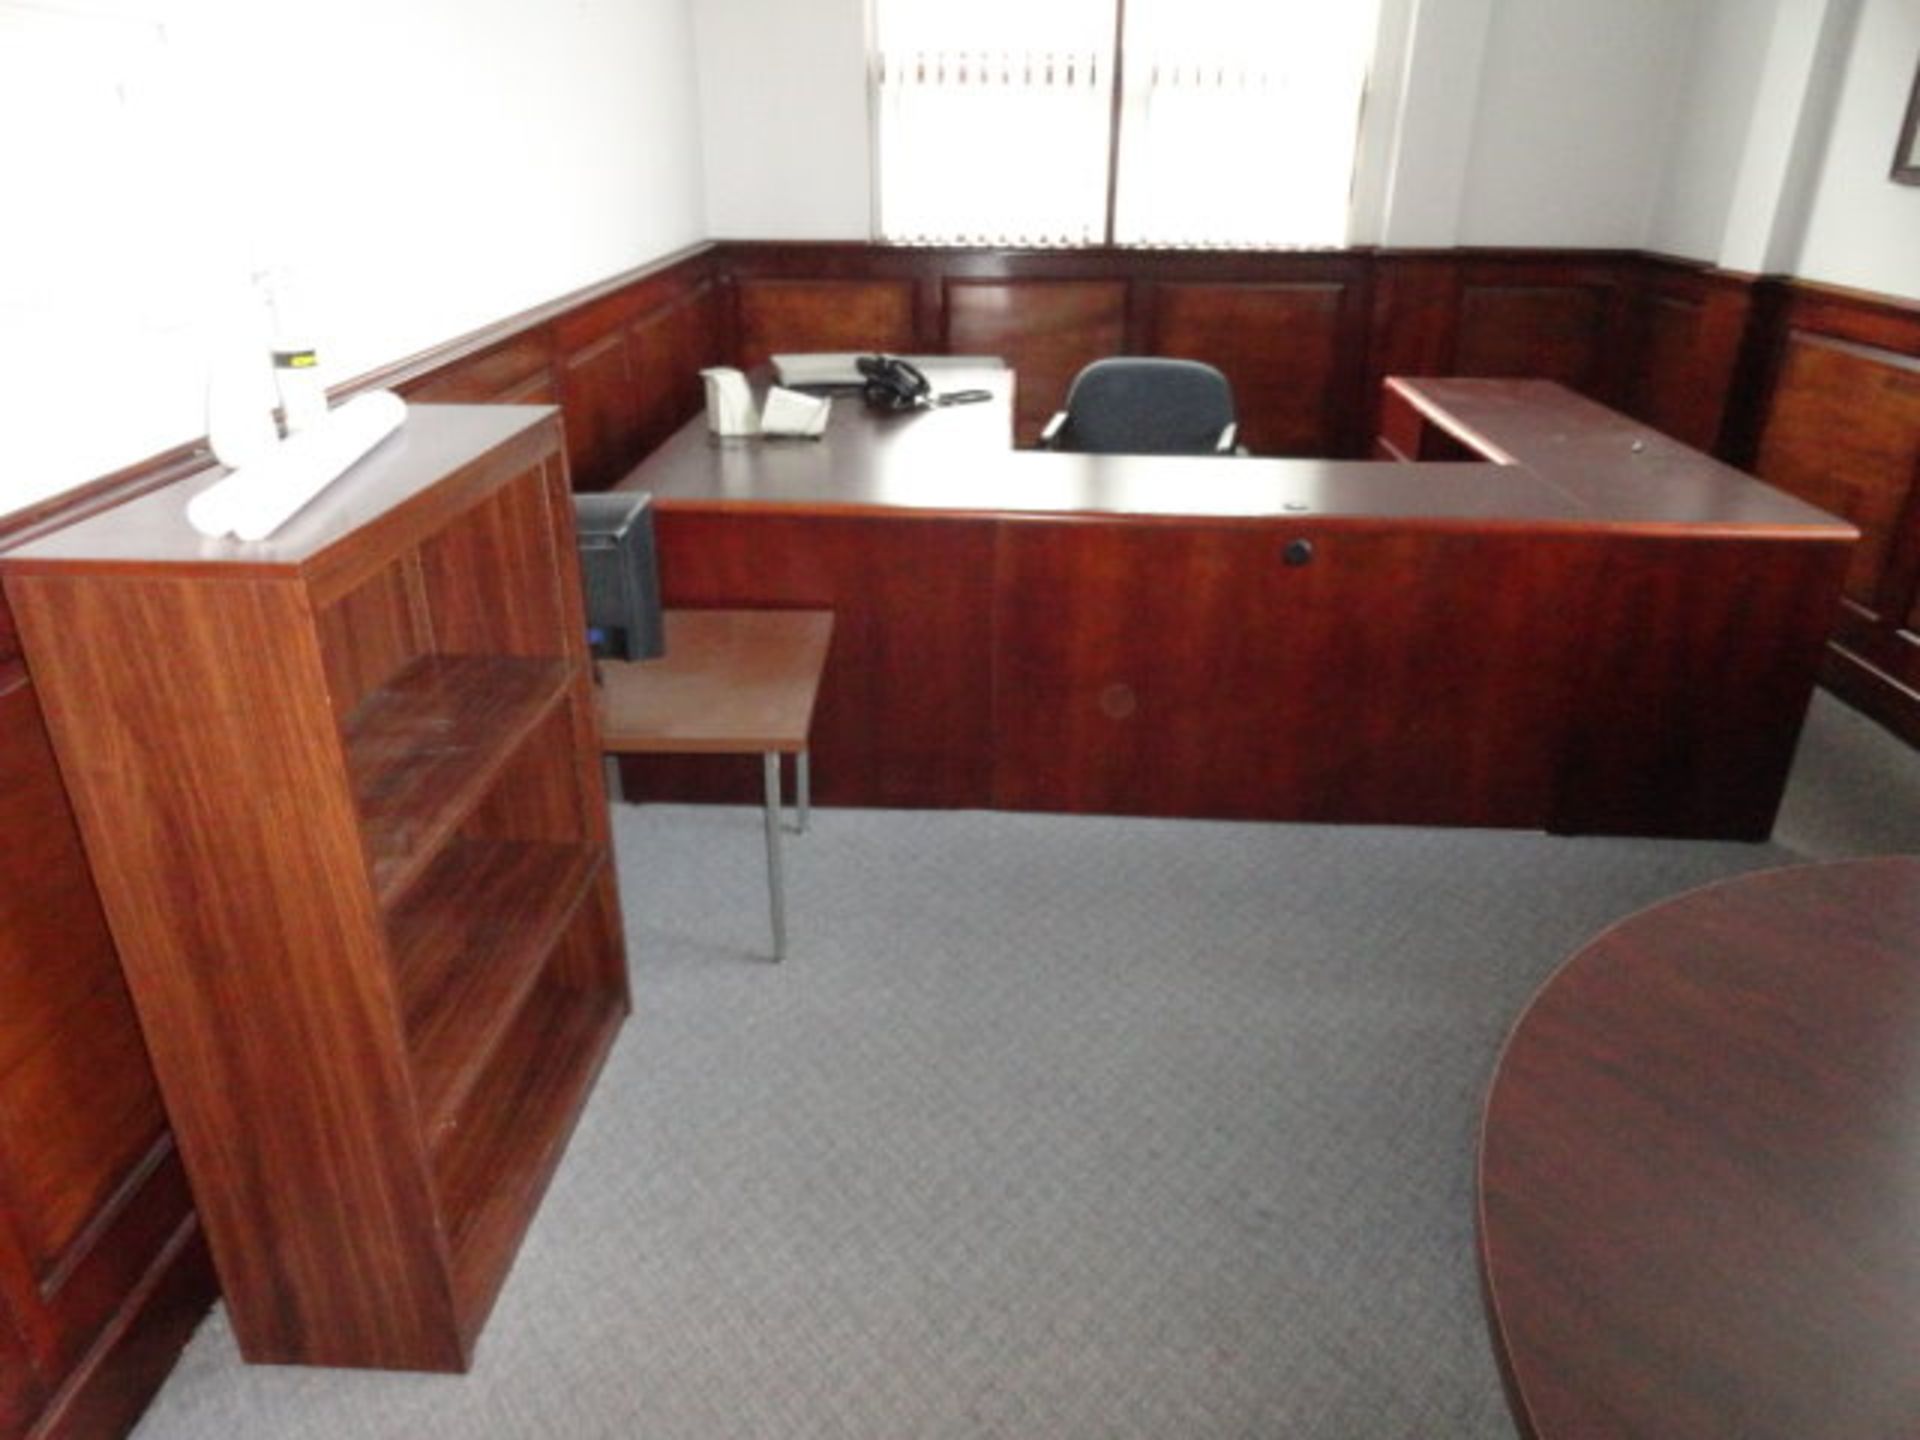 Contents of Office: Wood 'U' Shaped Desk, 5' Round Table, Book Case, ($240.00 Required Loading - Image 3 of 3